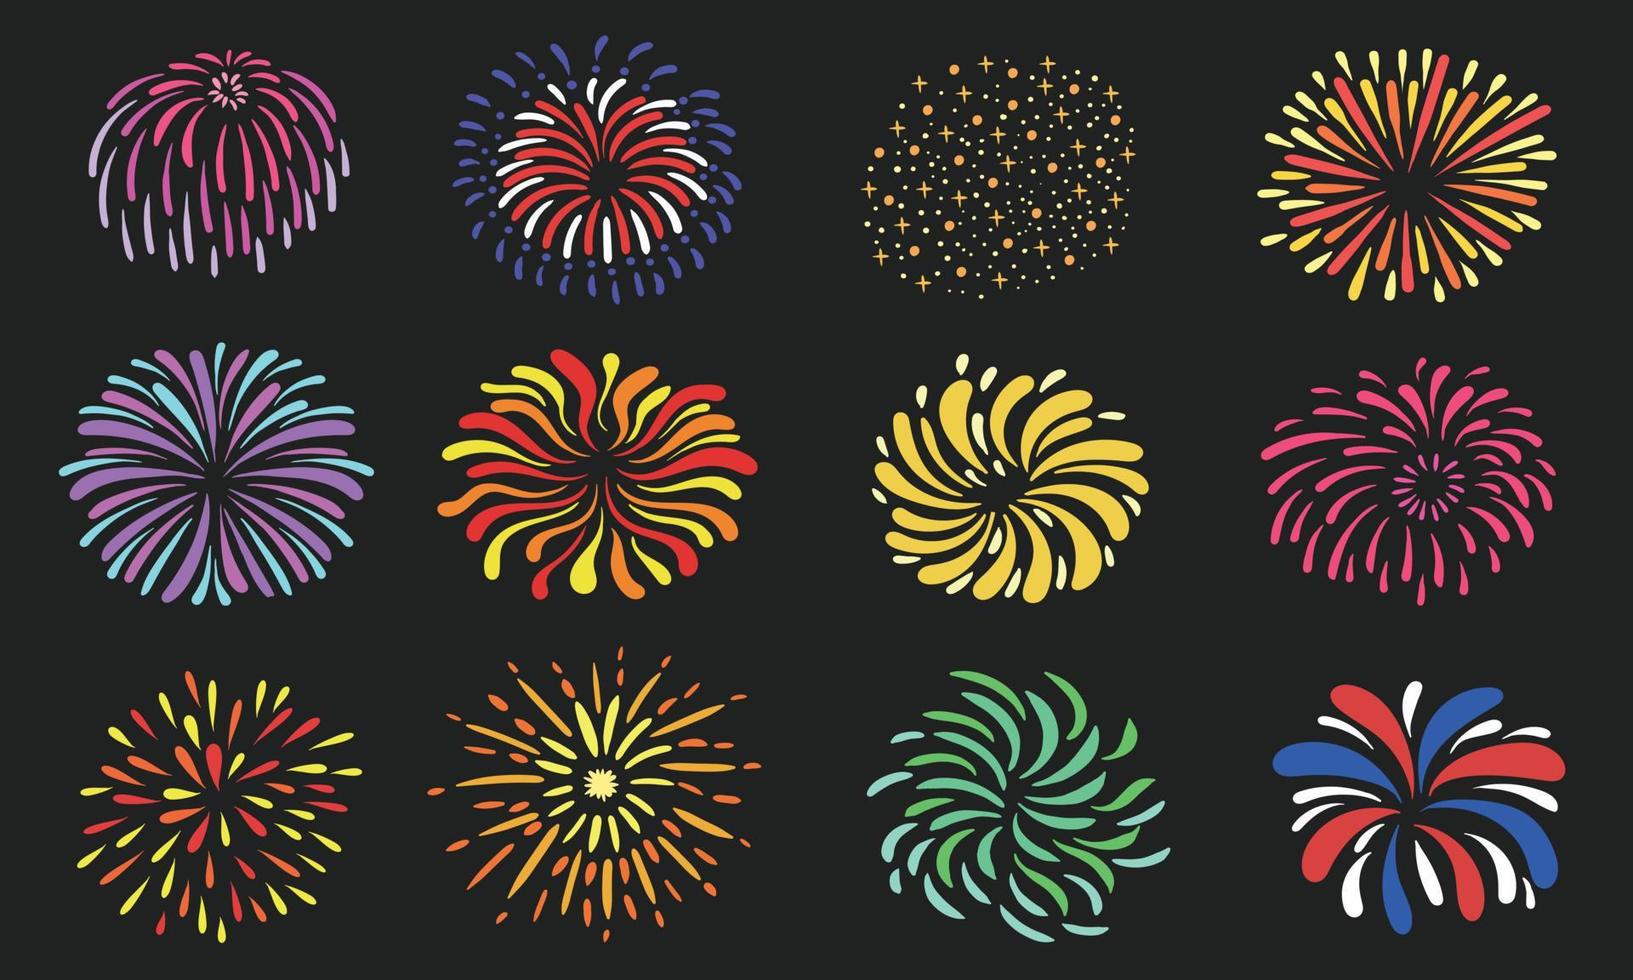 Fireworks abstract elements collection vector illustration